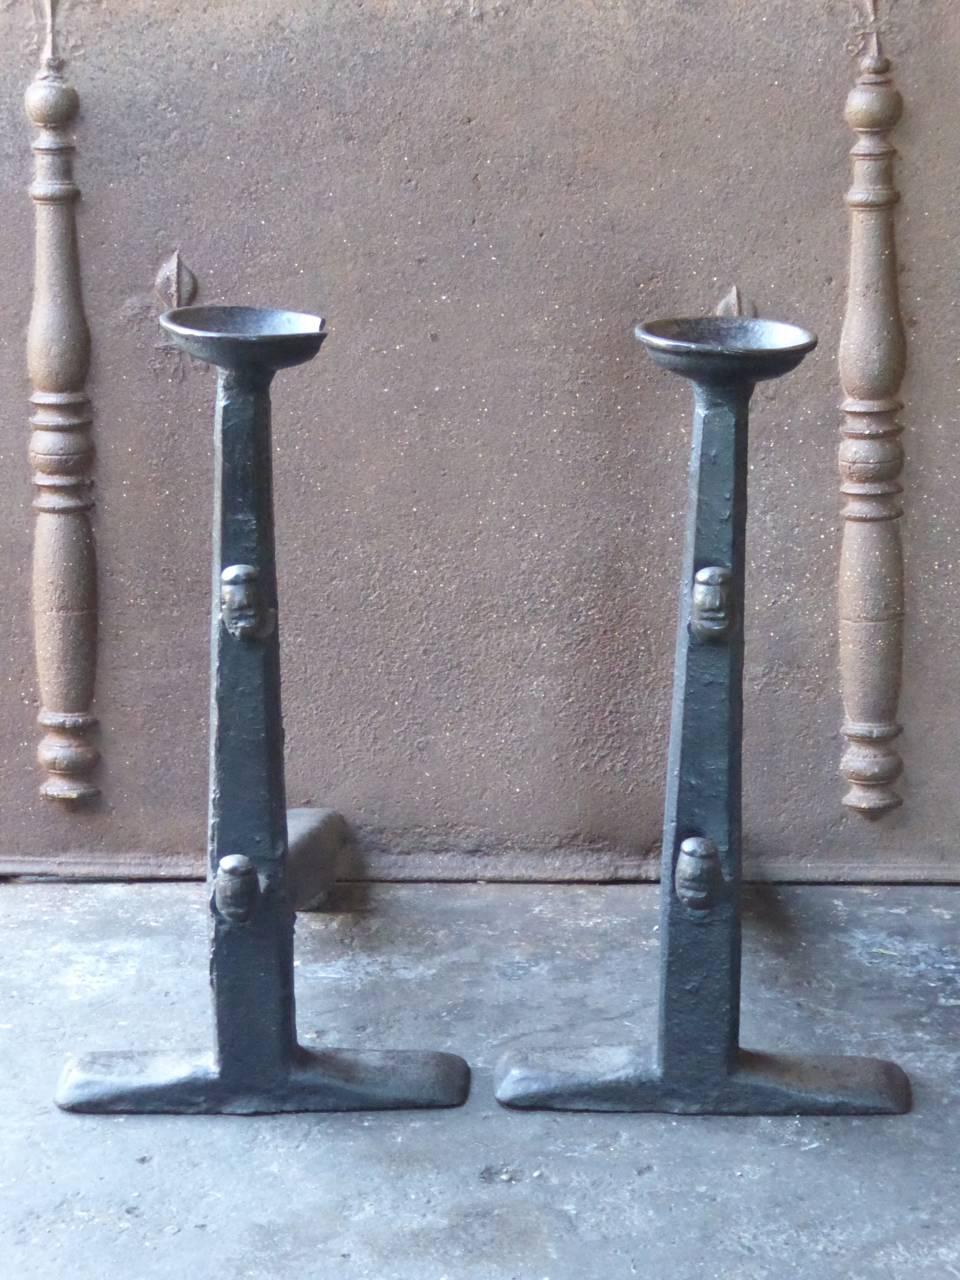 15th-16th century French Gothic andirons made of cast iron. The andirons have very special spit hooks, as can be seen in the pictures.

This product has to be shipped as freight due to its size and/or (volumetric) weight. You can contact us to find